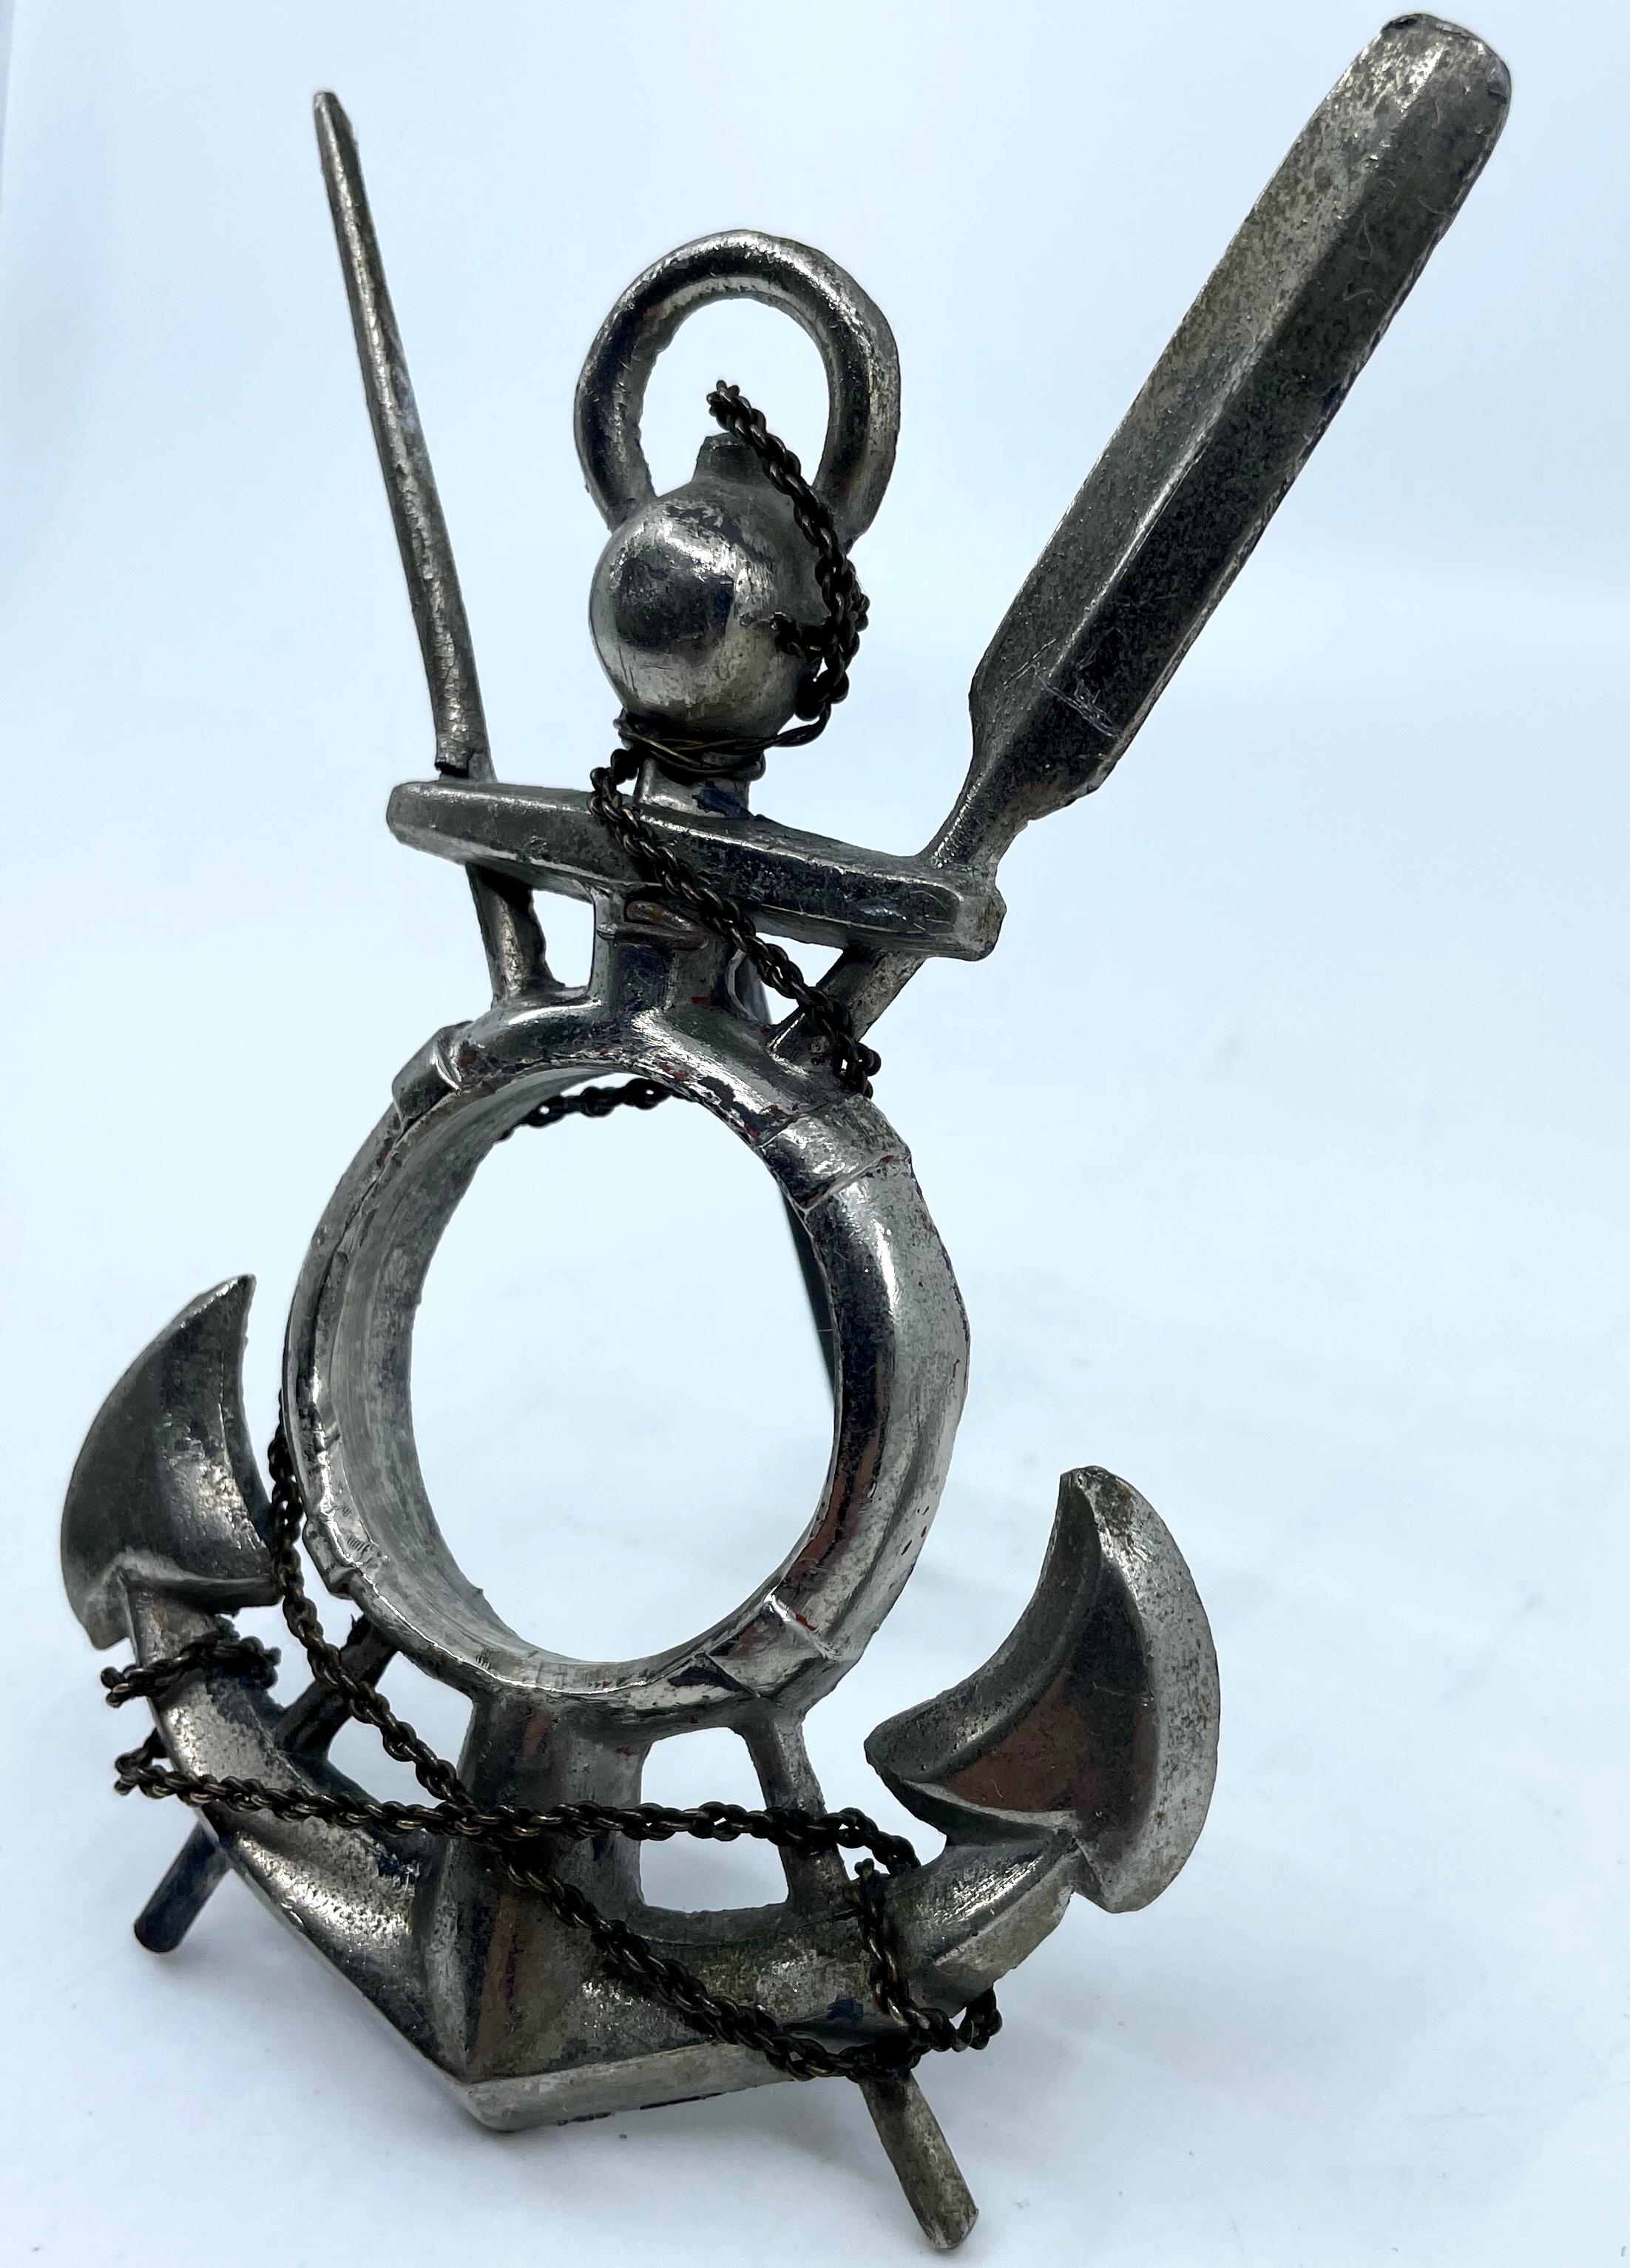 Italian silver metal naval picture frame. Antique and handsomely charming unique standing picture frame of nautical design consisting of and anchor, paddles and chain surrounding a small circular “lifesaver” frame. Italy, early 20th